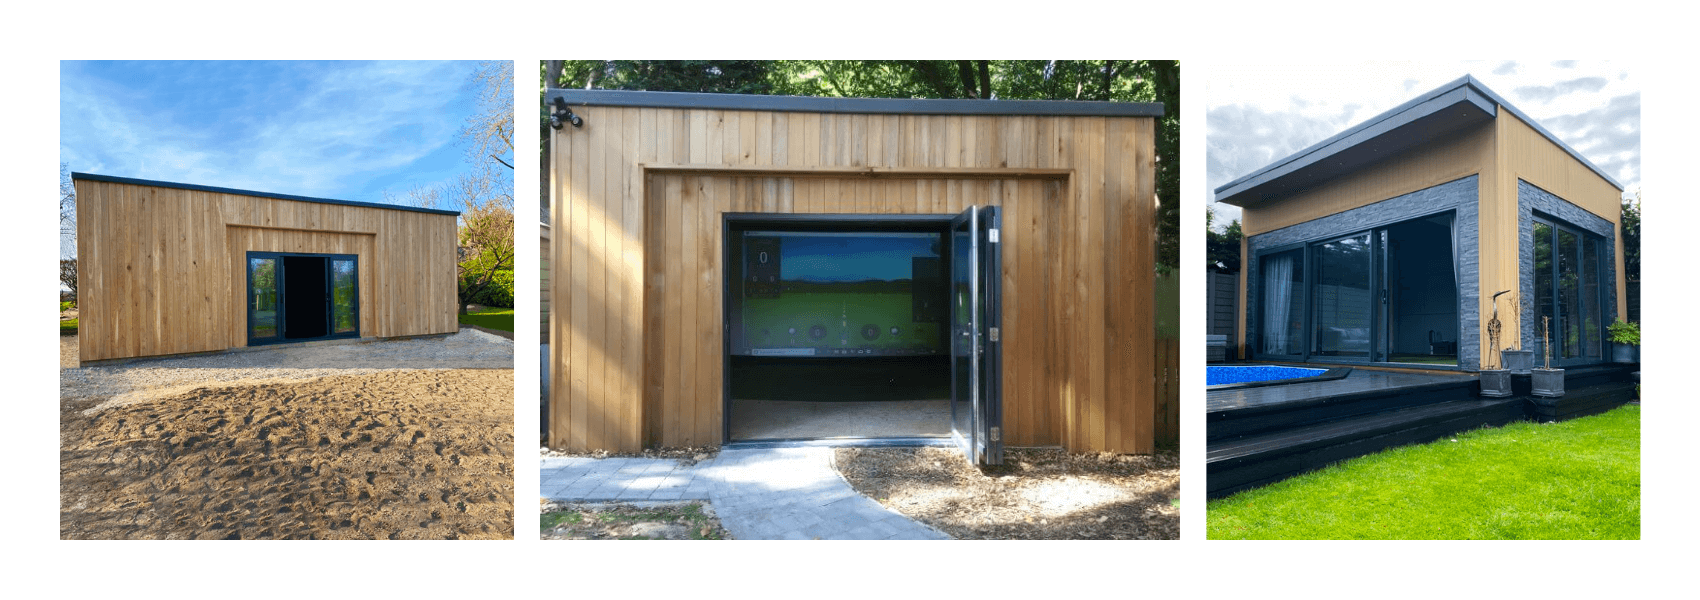 Golf Simulator Cabins Swing Systems, Outdoor Golf Simulator Shed